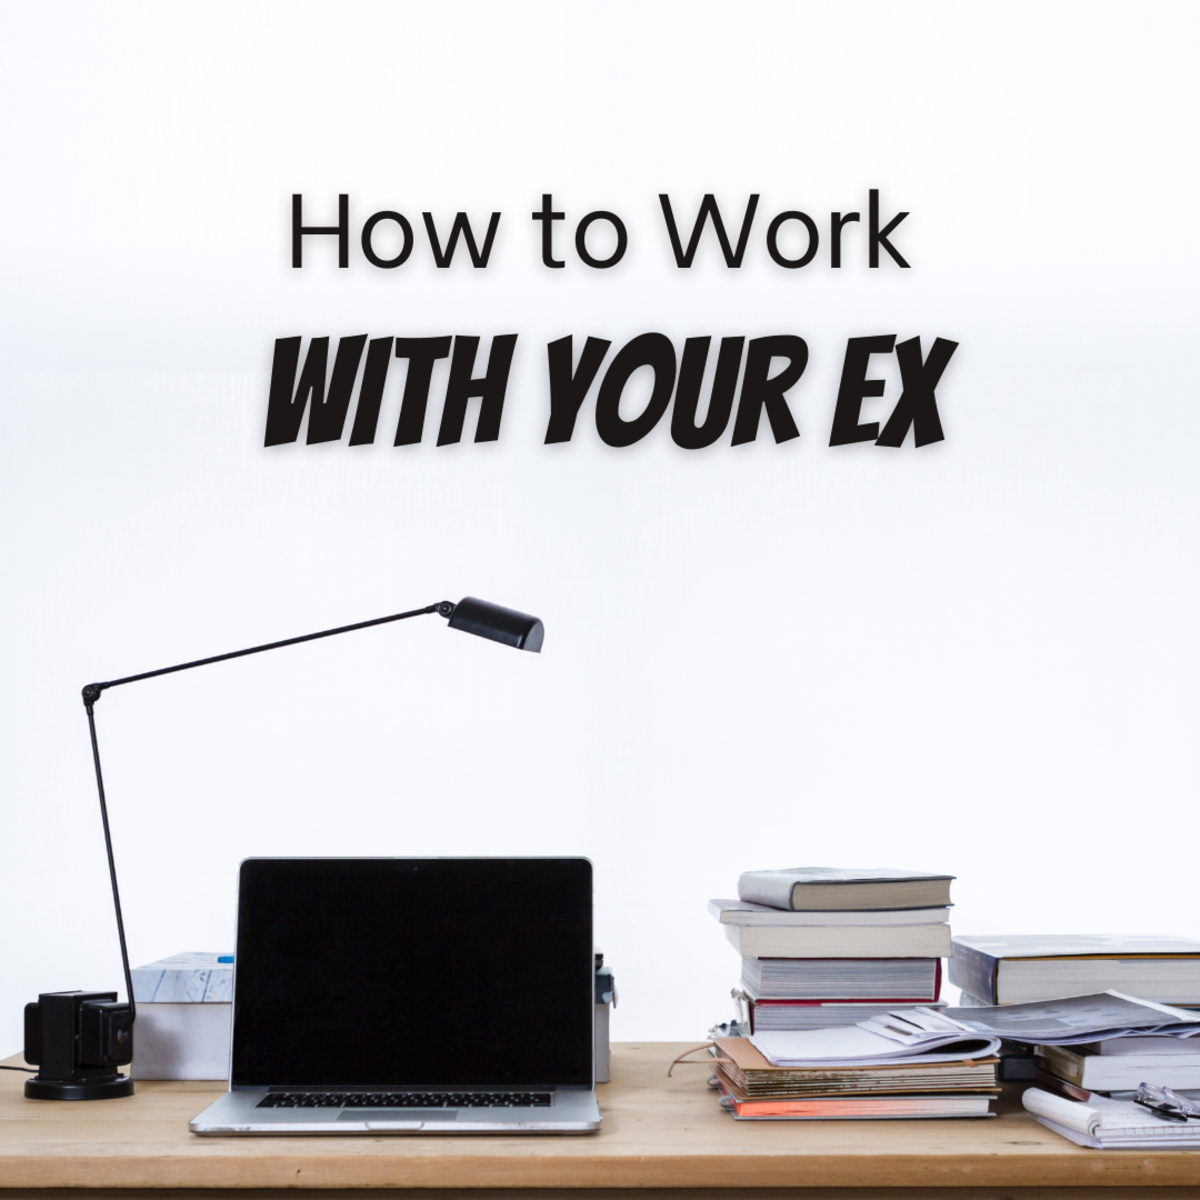 Here are 10 tips for navigating working with your ex!